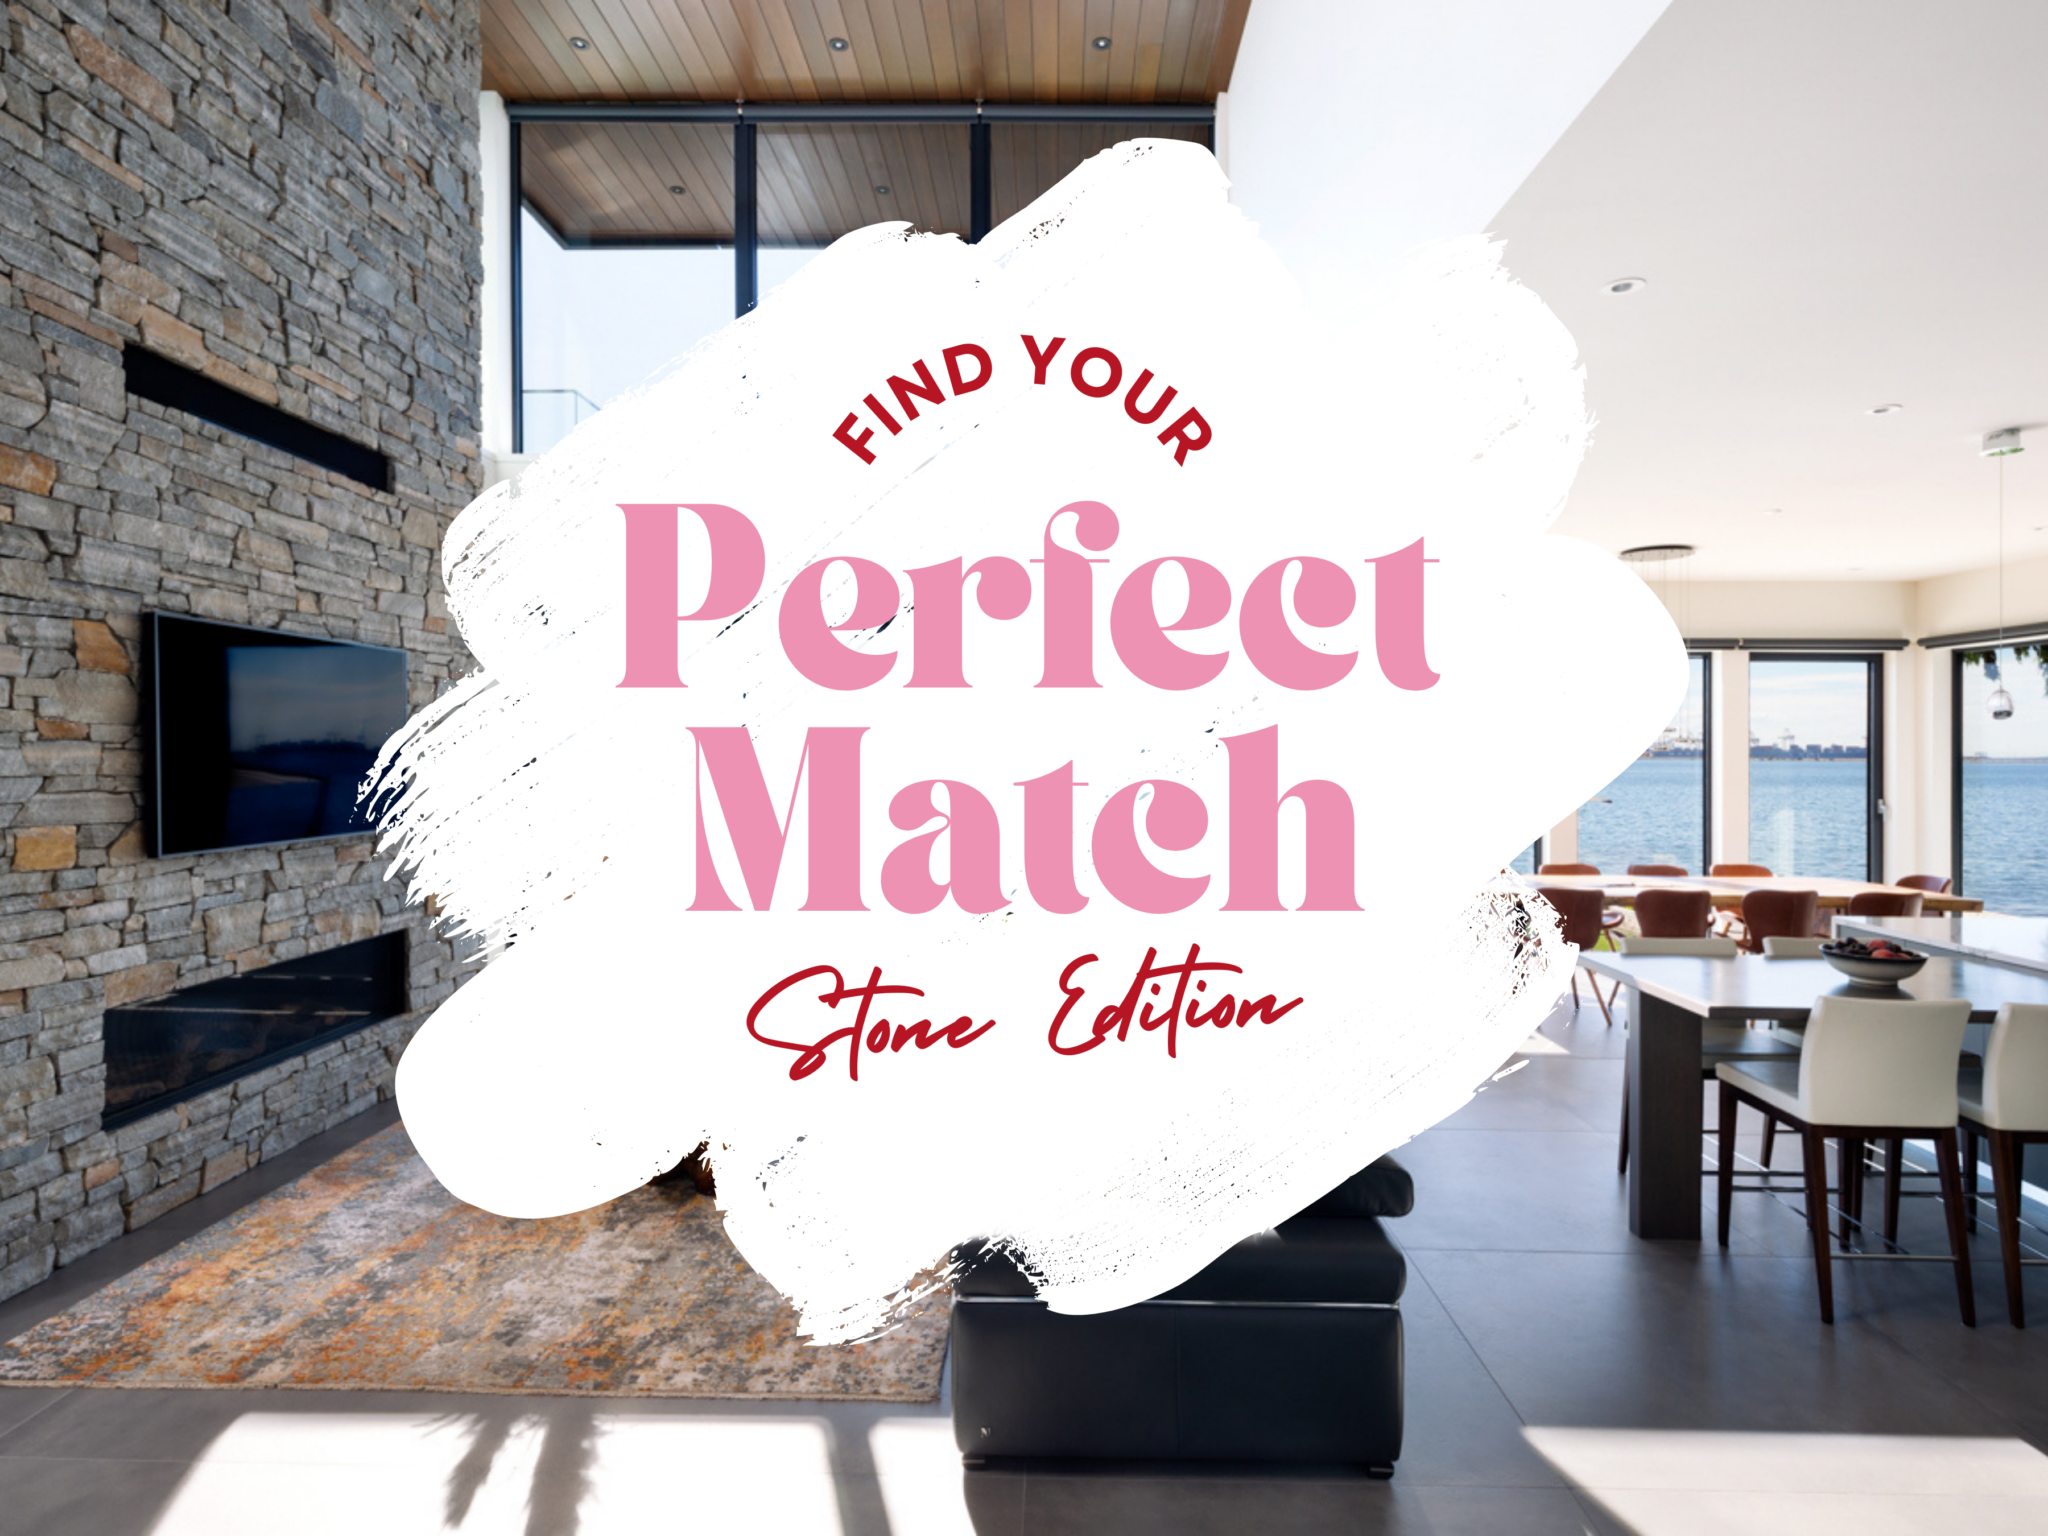 Find Your Perfect Match - Stone Edition